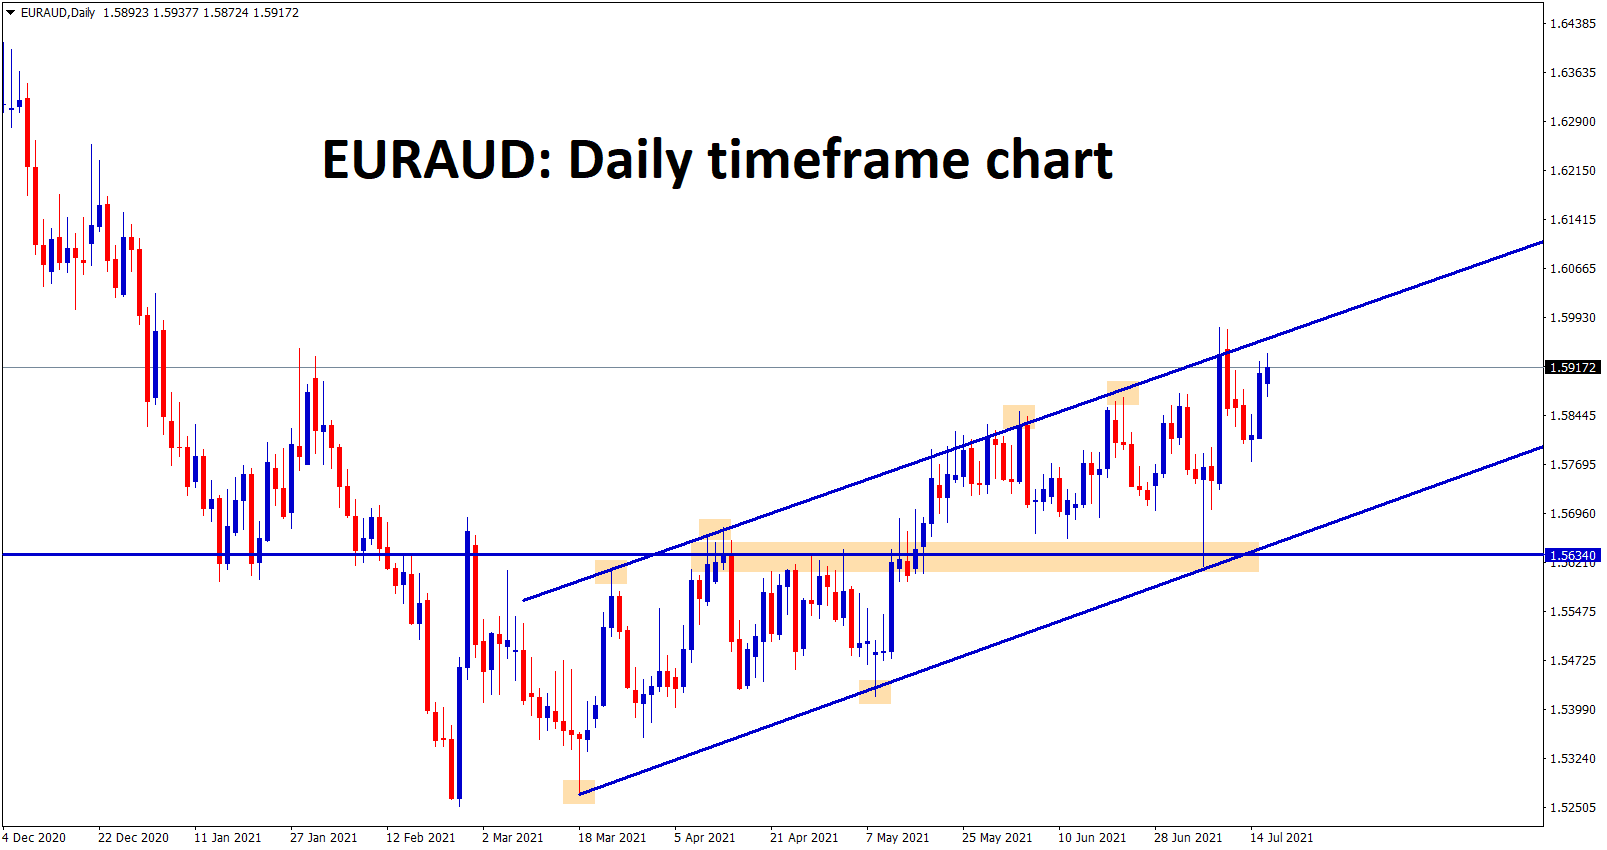 EURAUD continues to rise up by making 40 to 60 retracement in every swing.